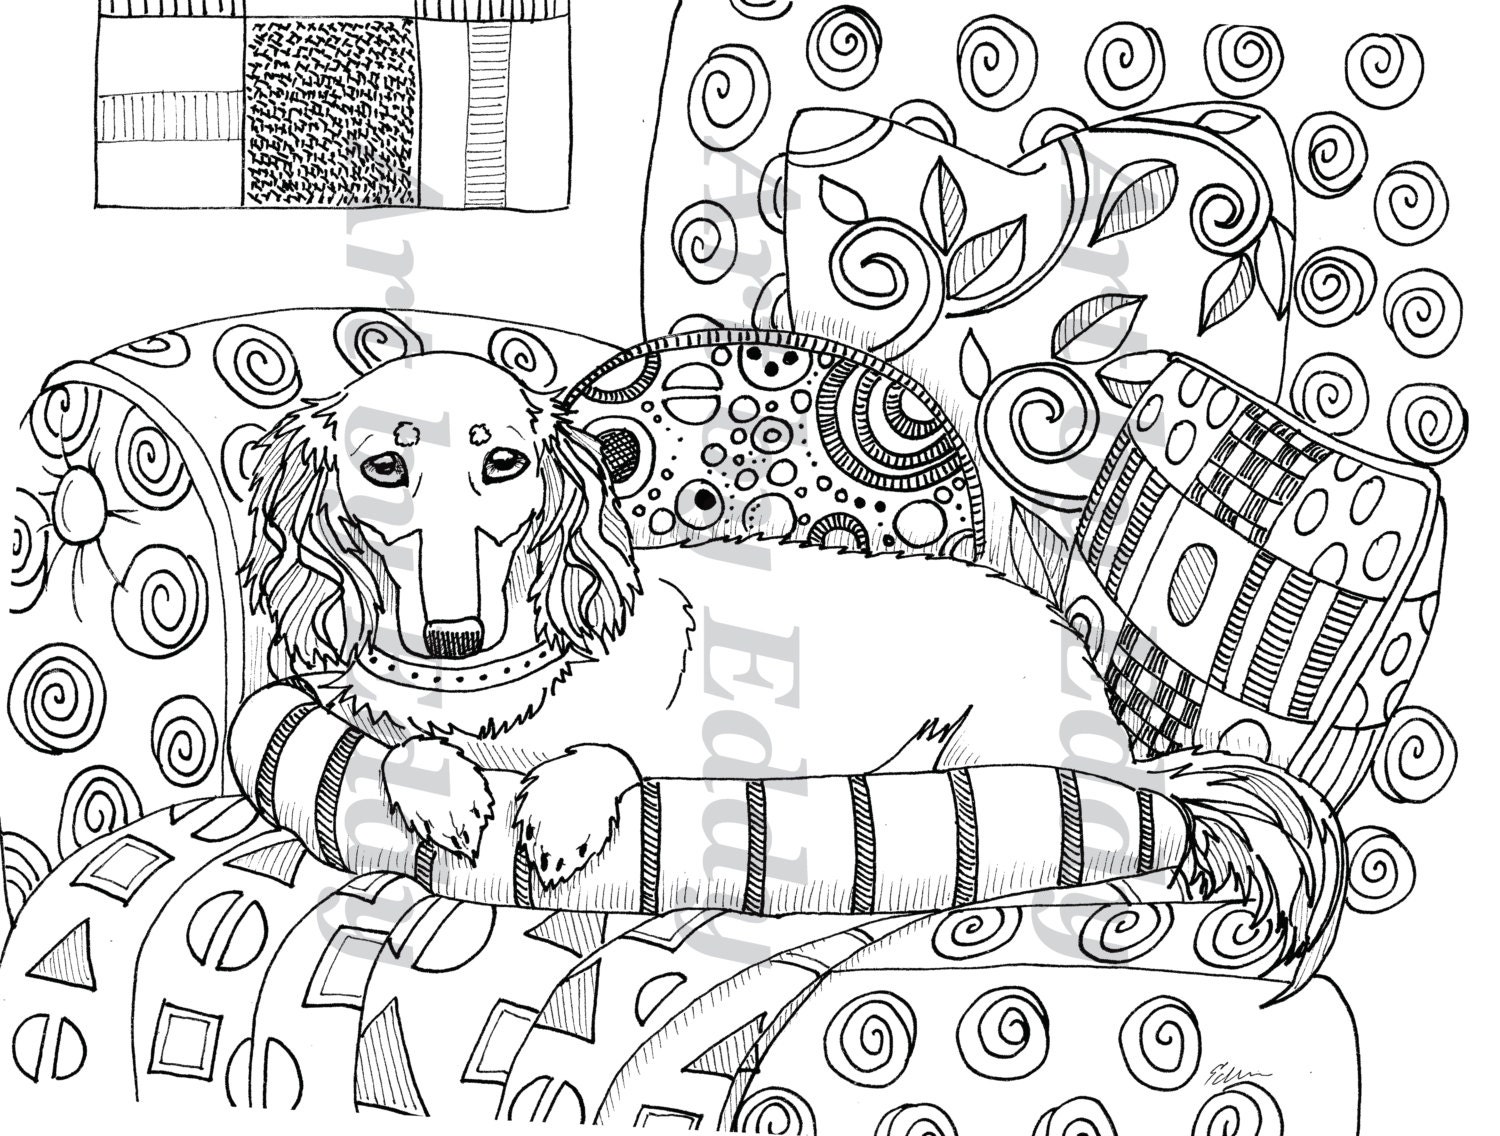 Download Art of Dachshund Single Coloring Page Klimt Inspired Doxie